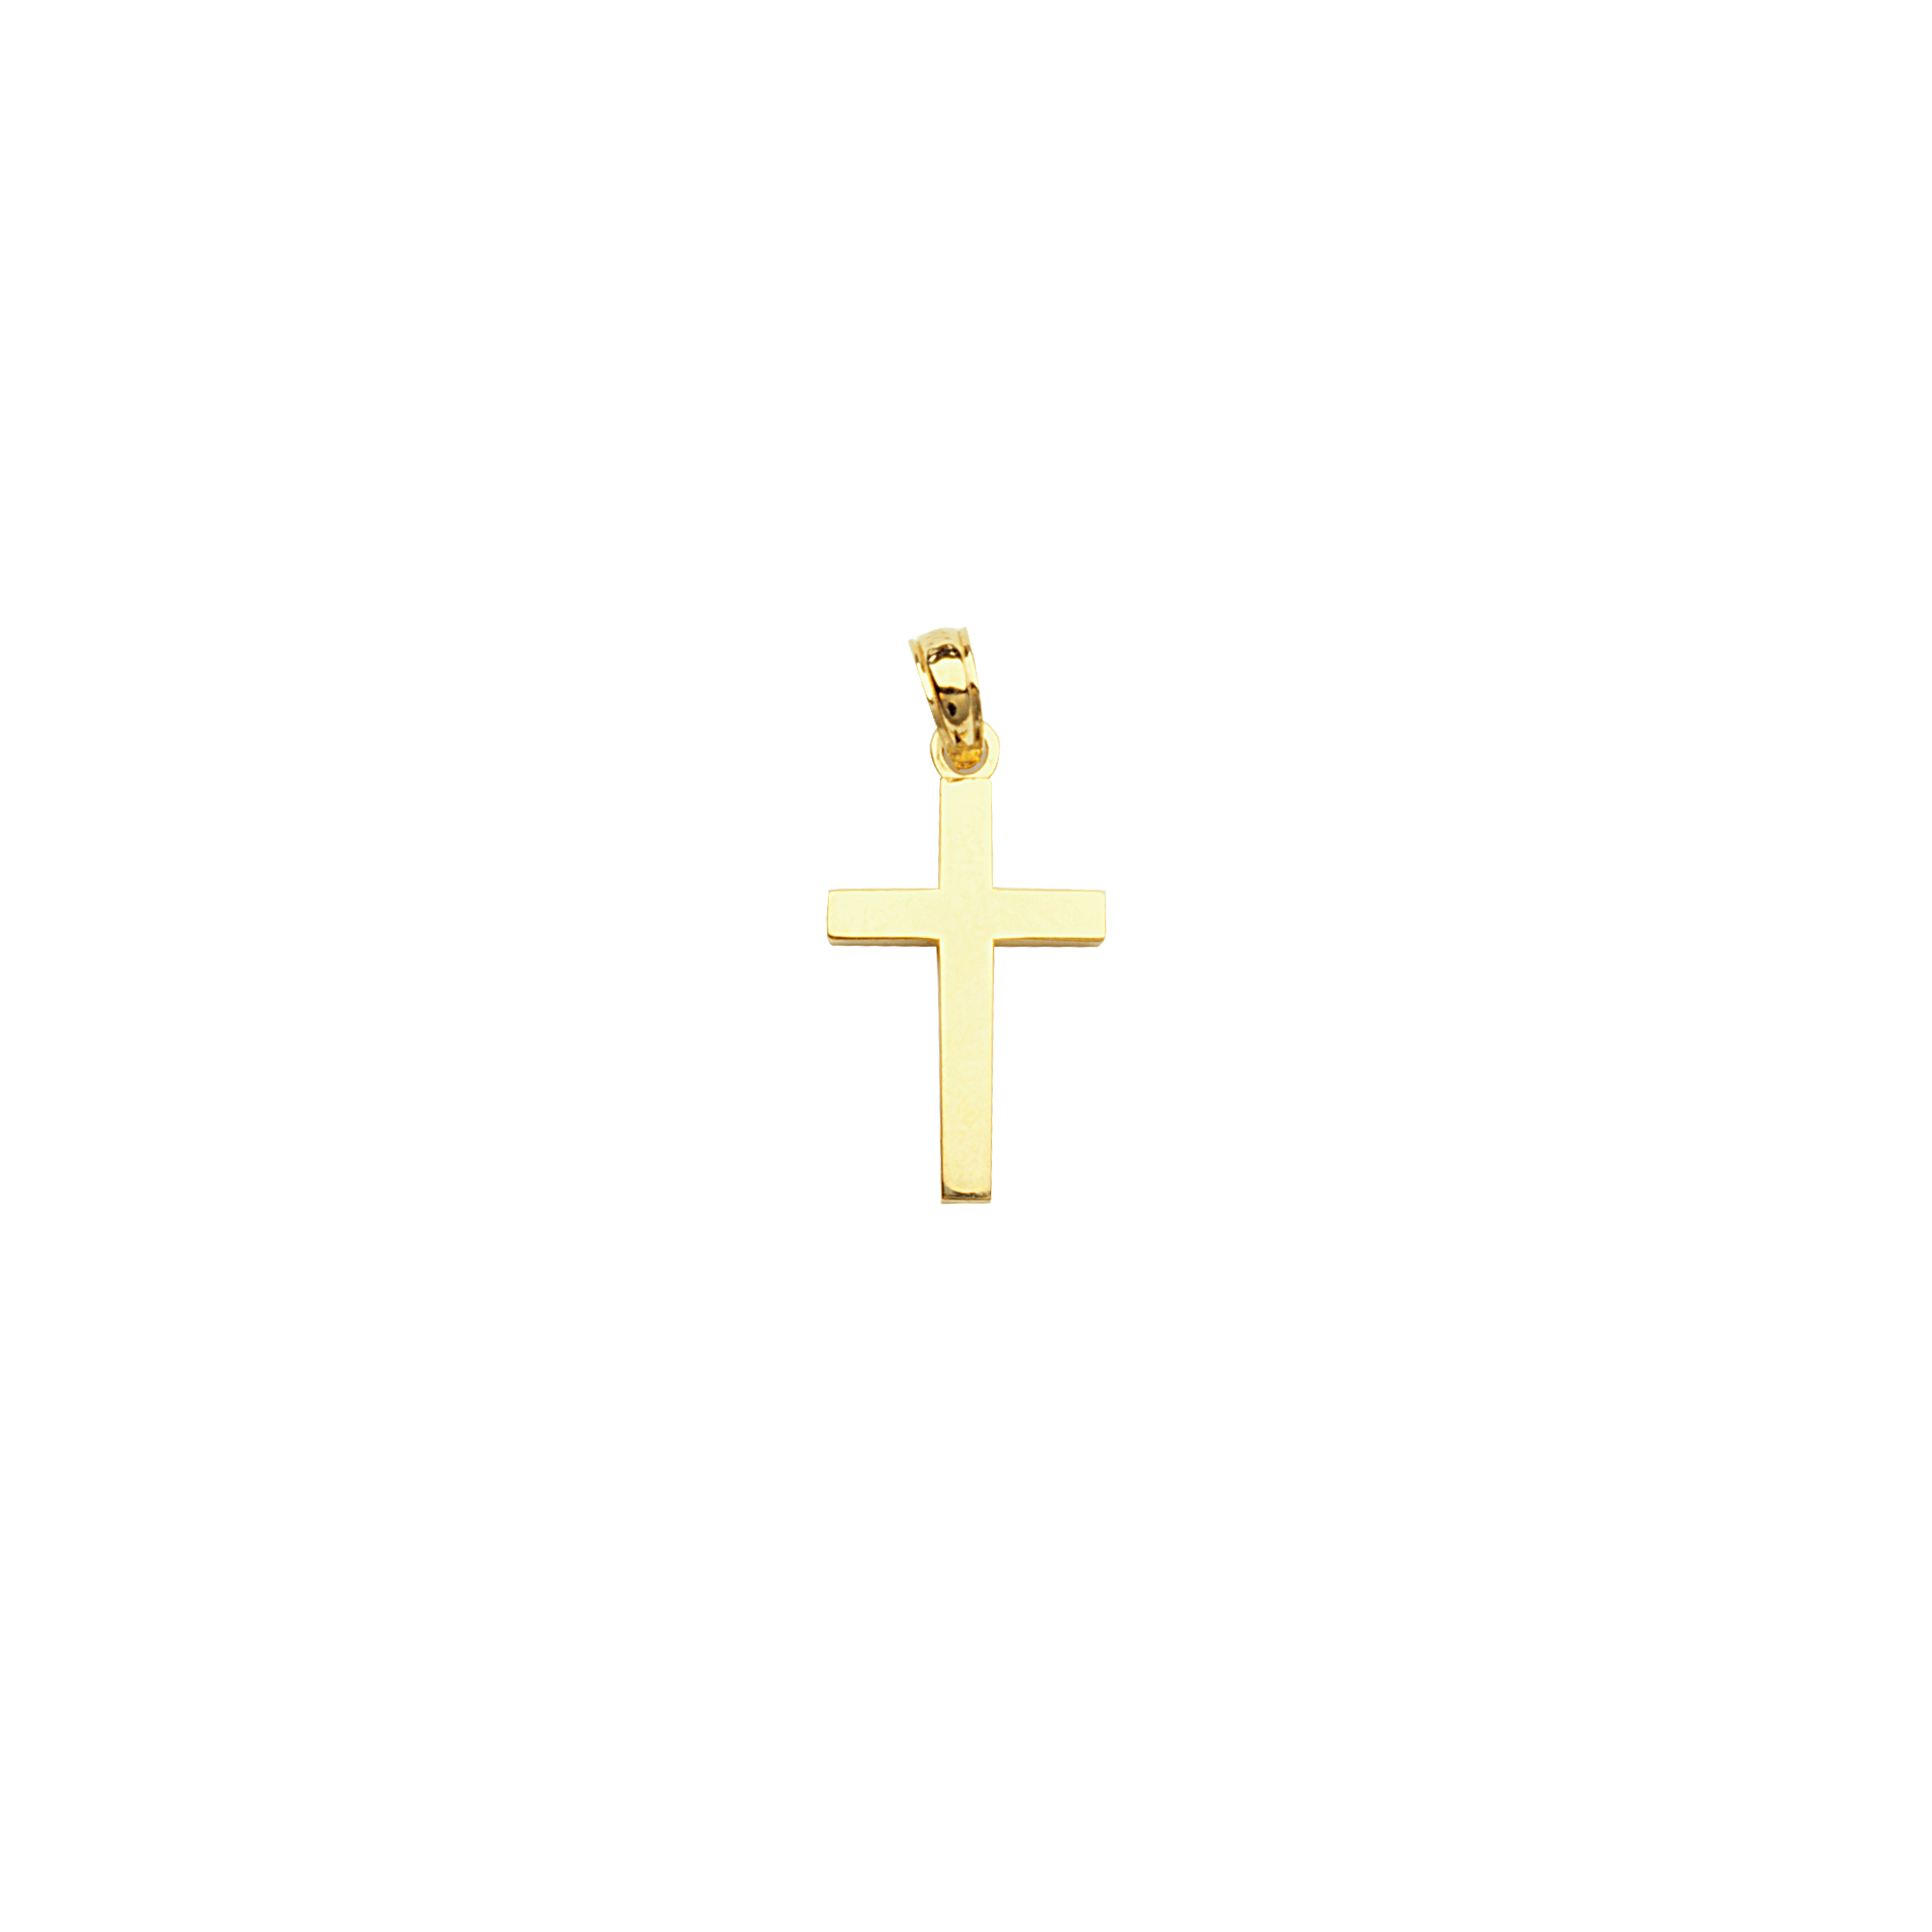 Bevelled Cross with Square Tips - KCROS0916